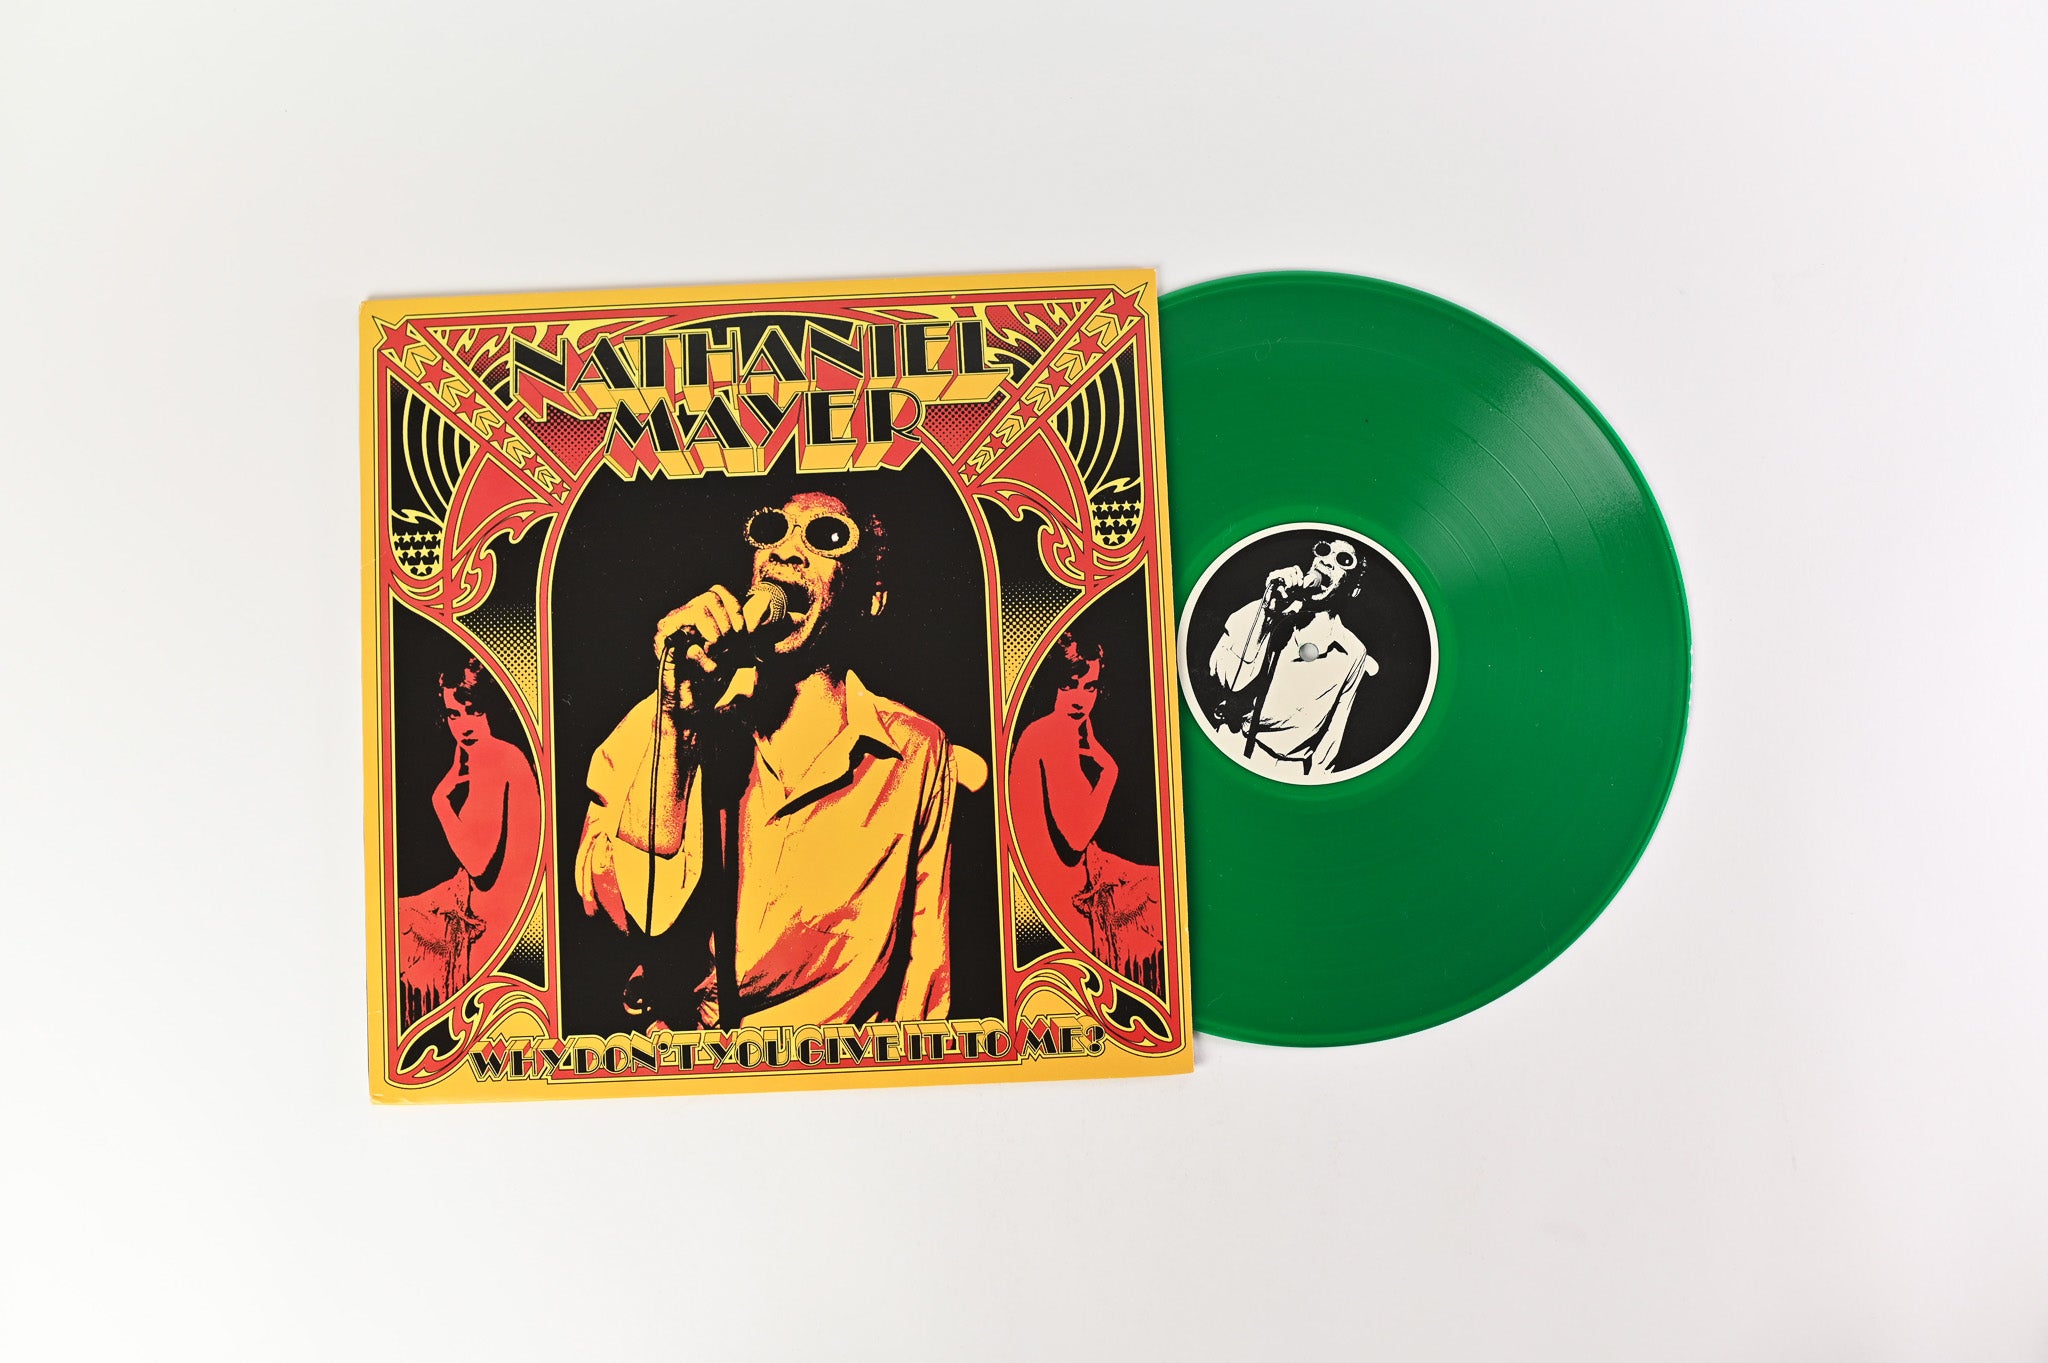 Nathaniel Mayer - Why Don't You Give It To Me? on Alive Records - Green Vinyl